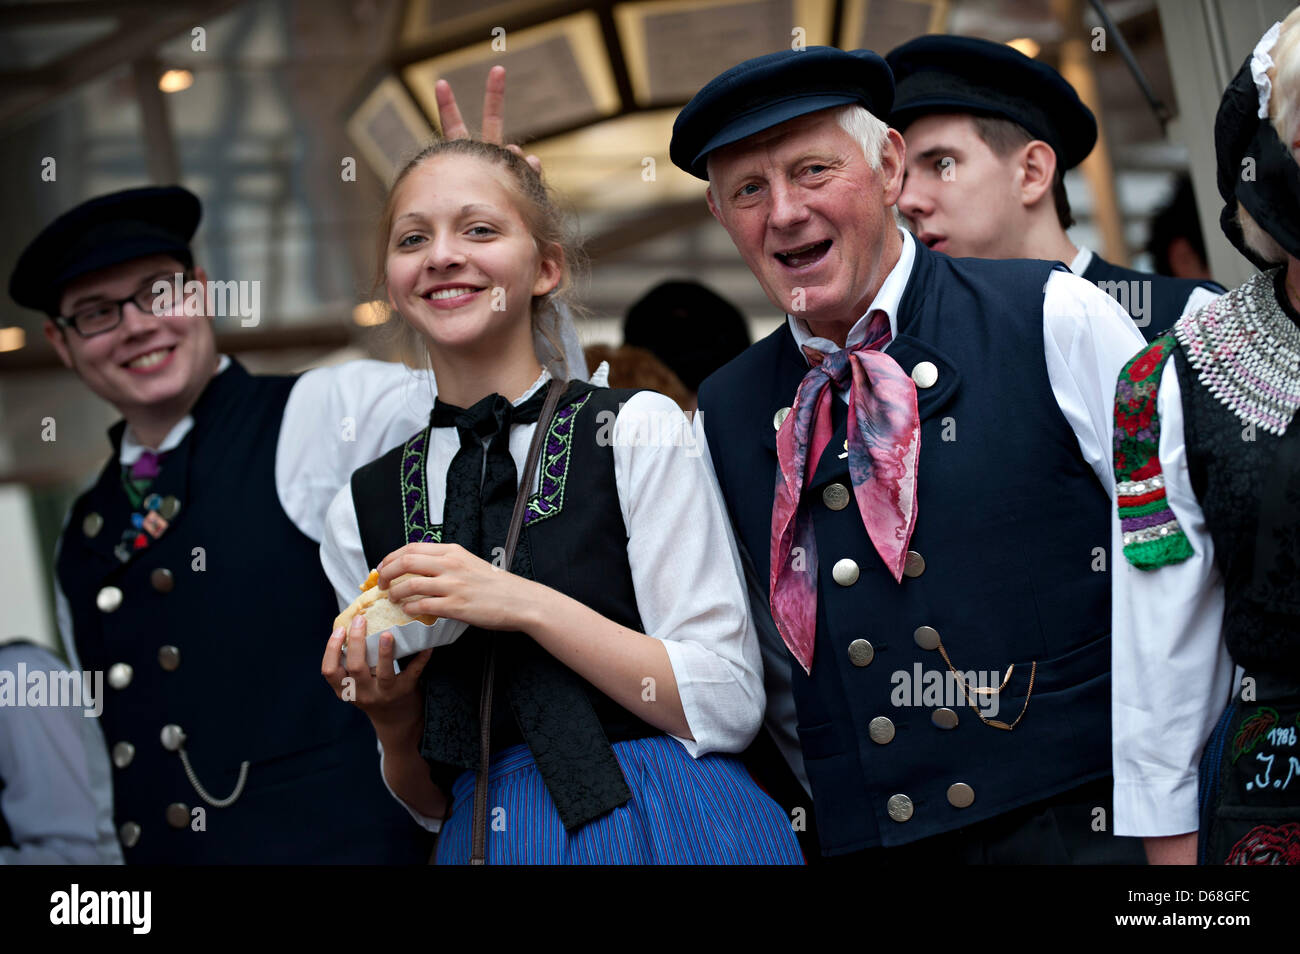 A group of people wearing traditional German costumes enjoy themselves during the Day of Saxonians in Duderstadt, Germany, 14 July 2012. The 32nd Day of Saxonians takes place between 13 and 15 July 2012. Photo: EMILY WABITSCH Stock Photo